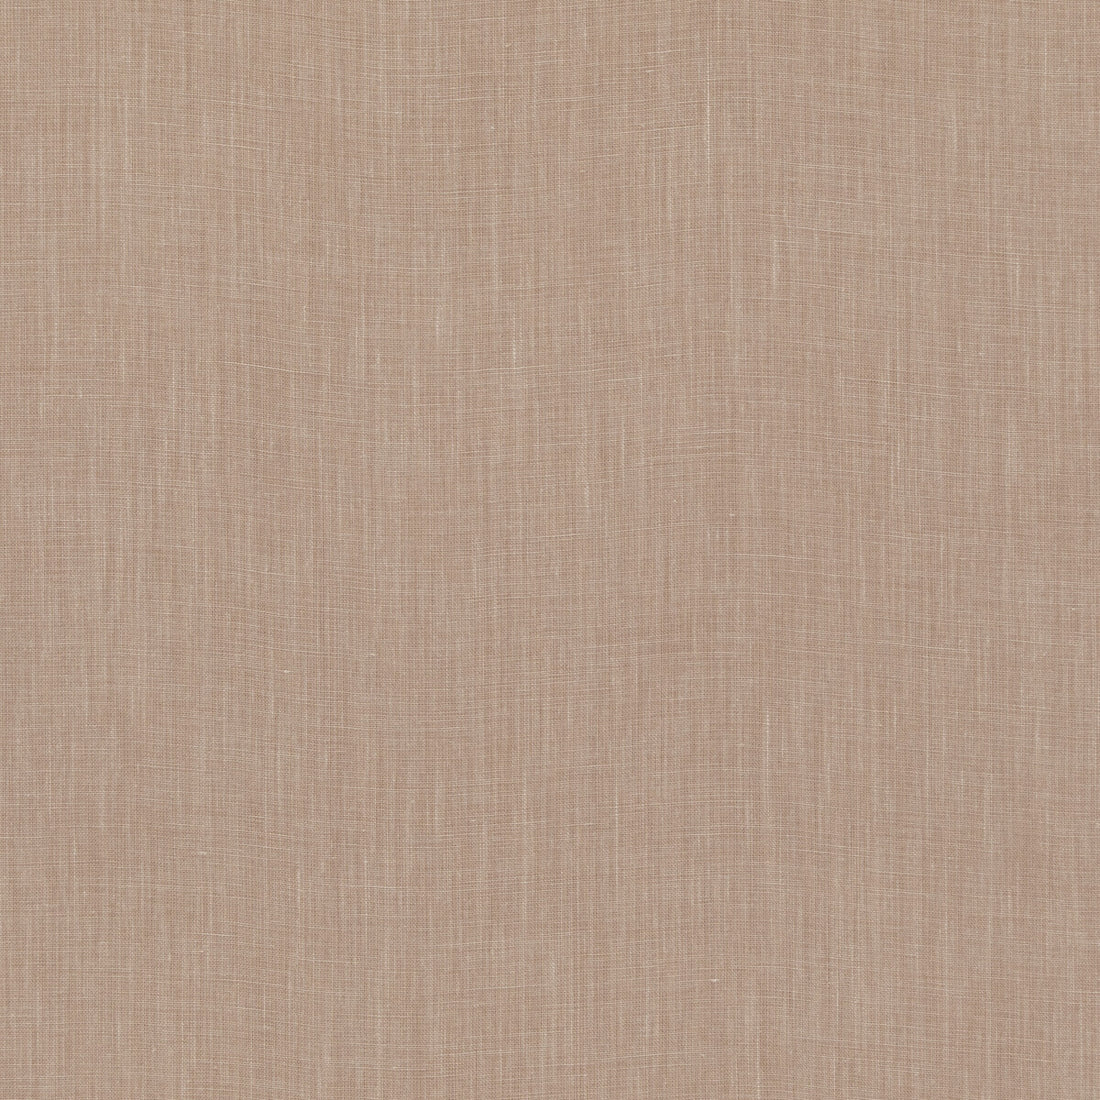 Kravet Basics fabric in 33767-17 color - pattern 33767.17.0 - by Kravet Basics in the Perfect Plains collection